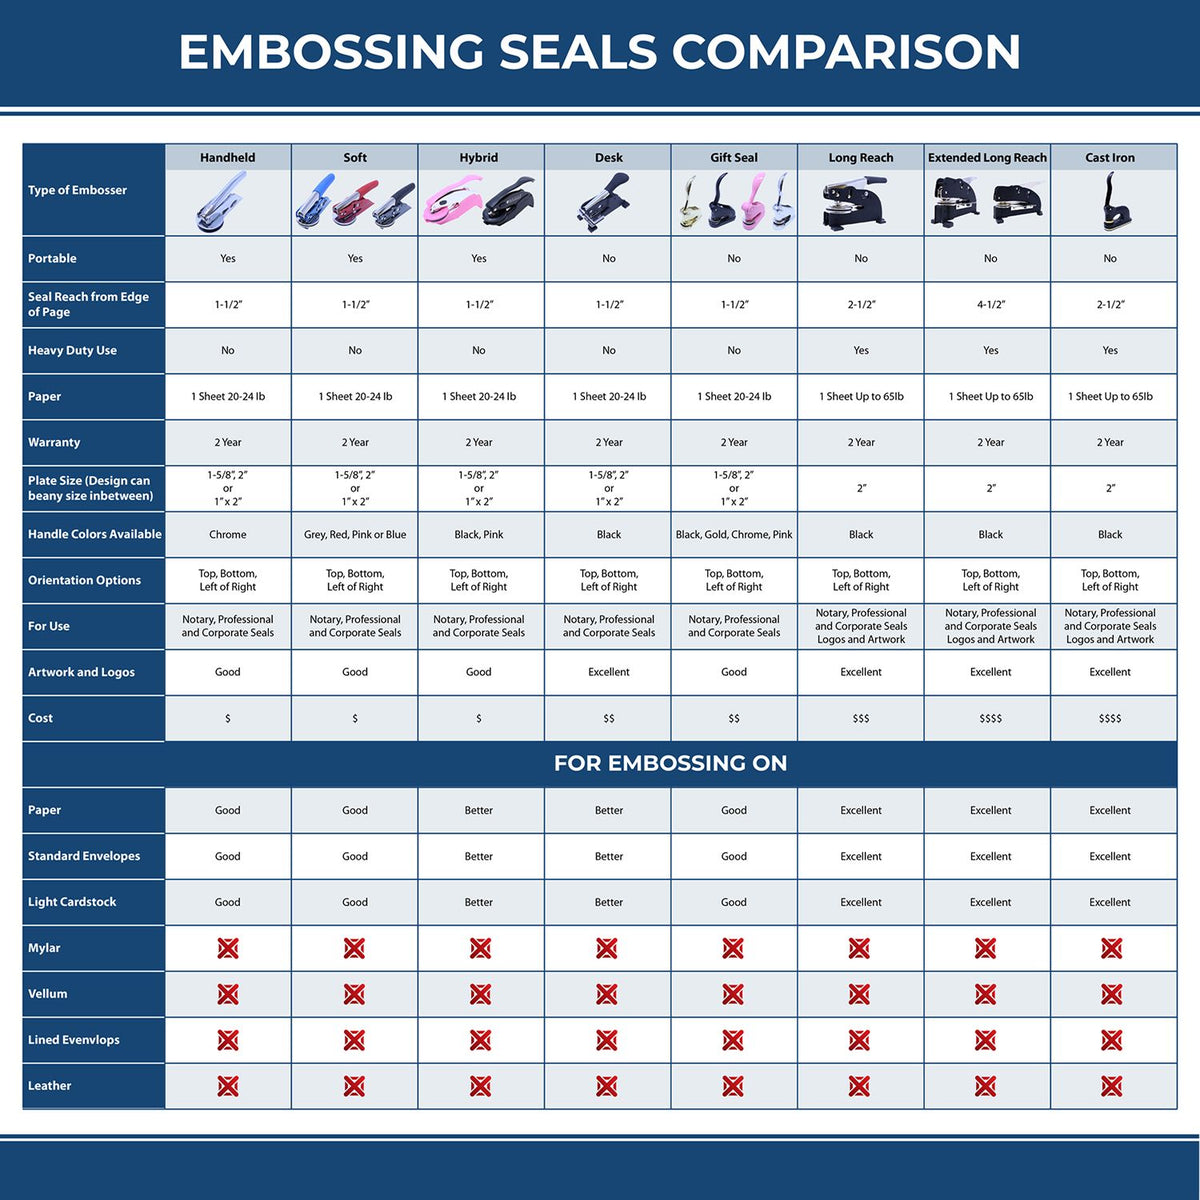 A comparison chart for the different types of mount models available for the Soft Illinois Professional Engineer Seal.